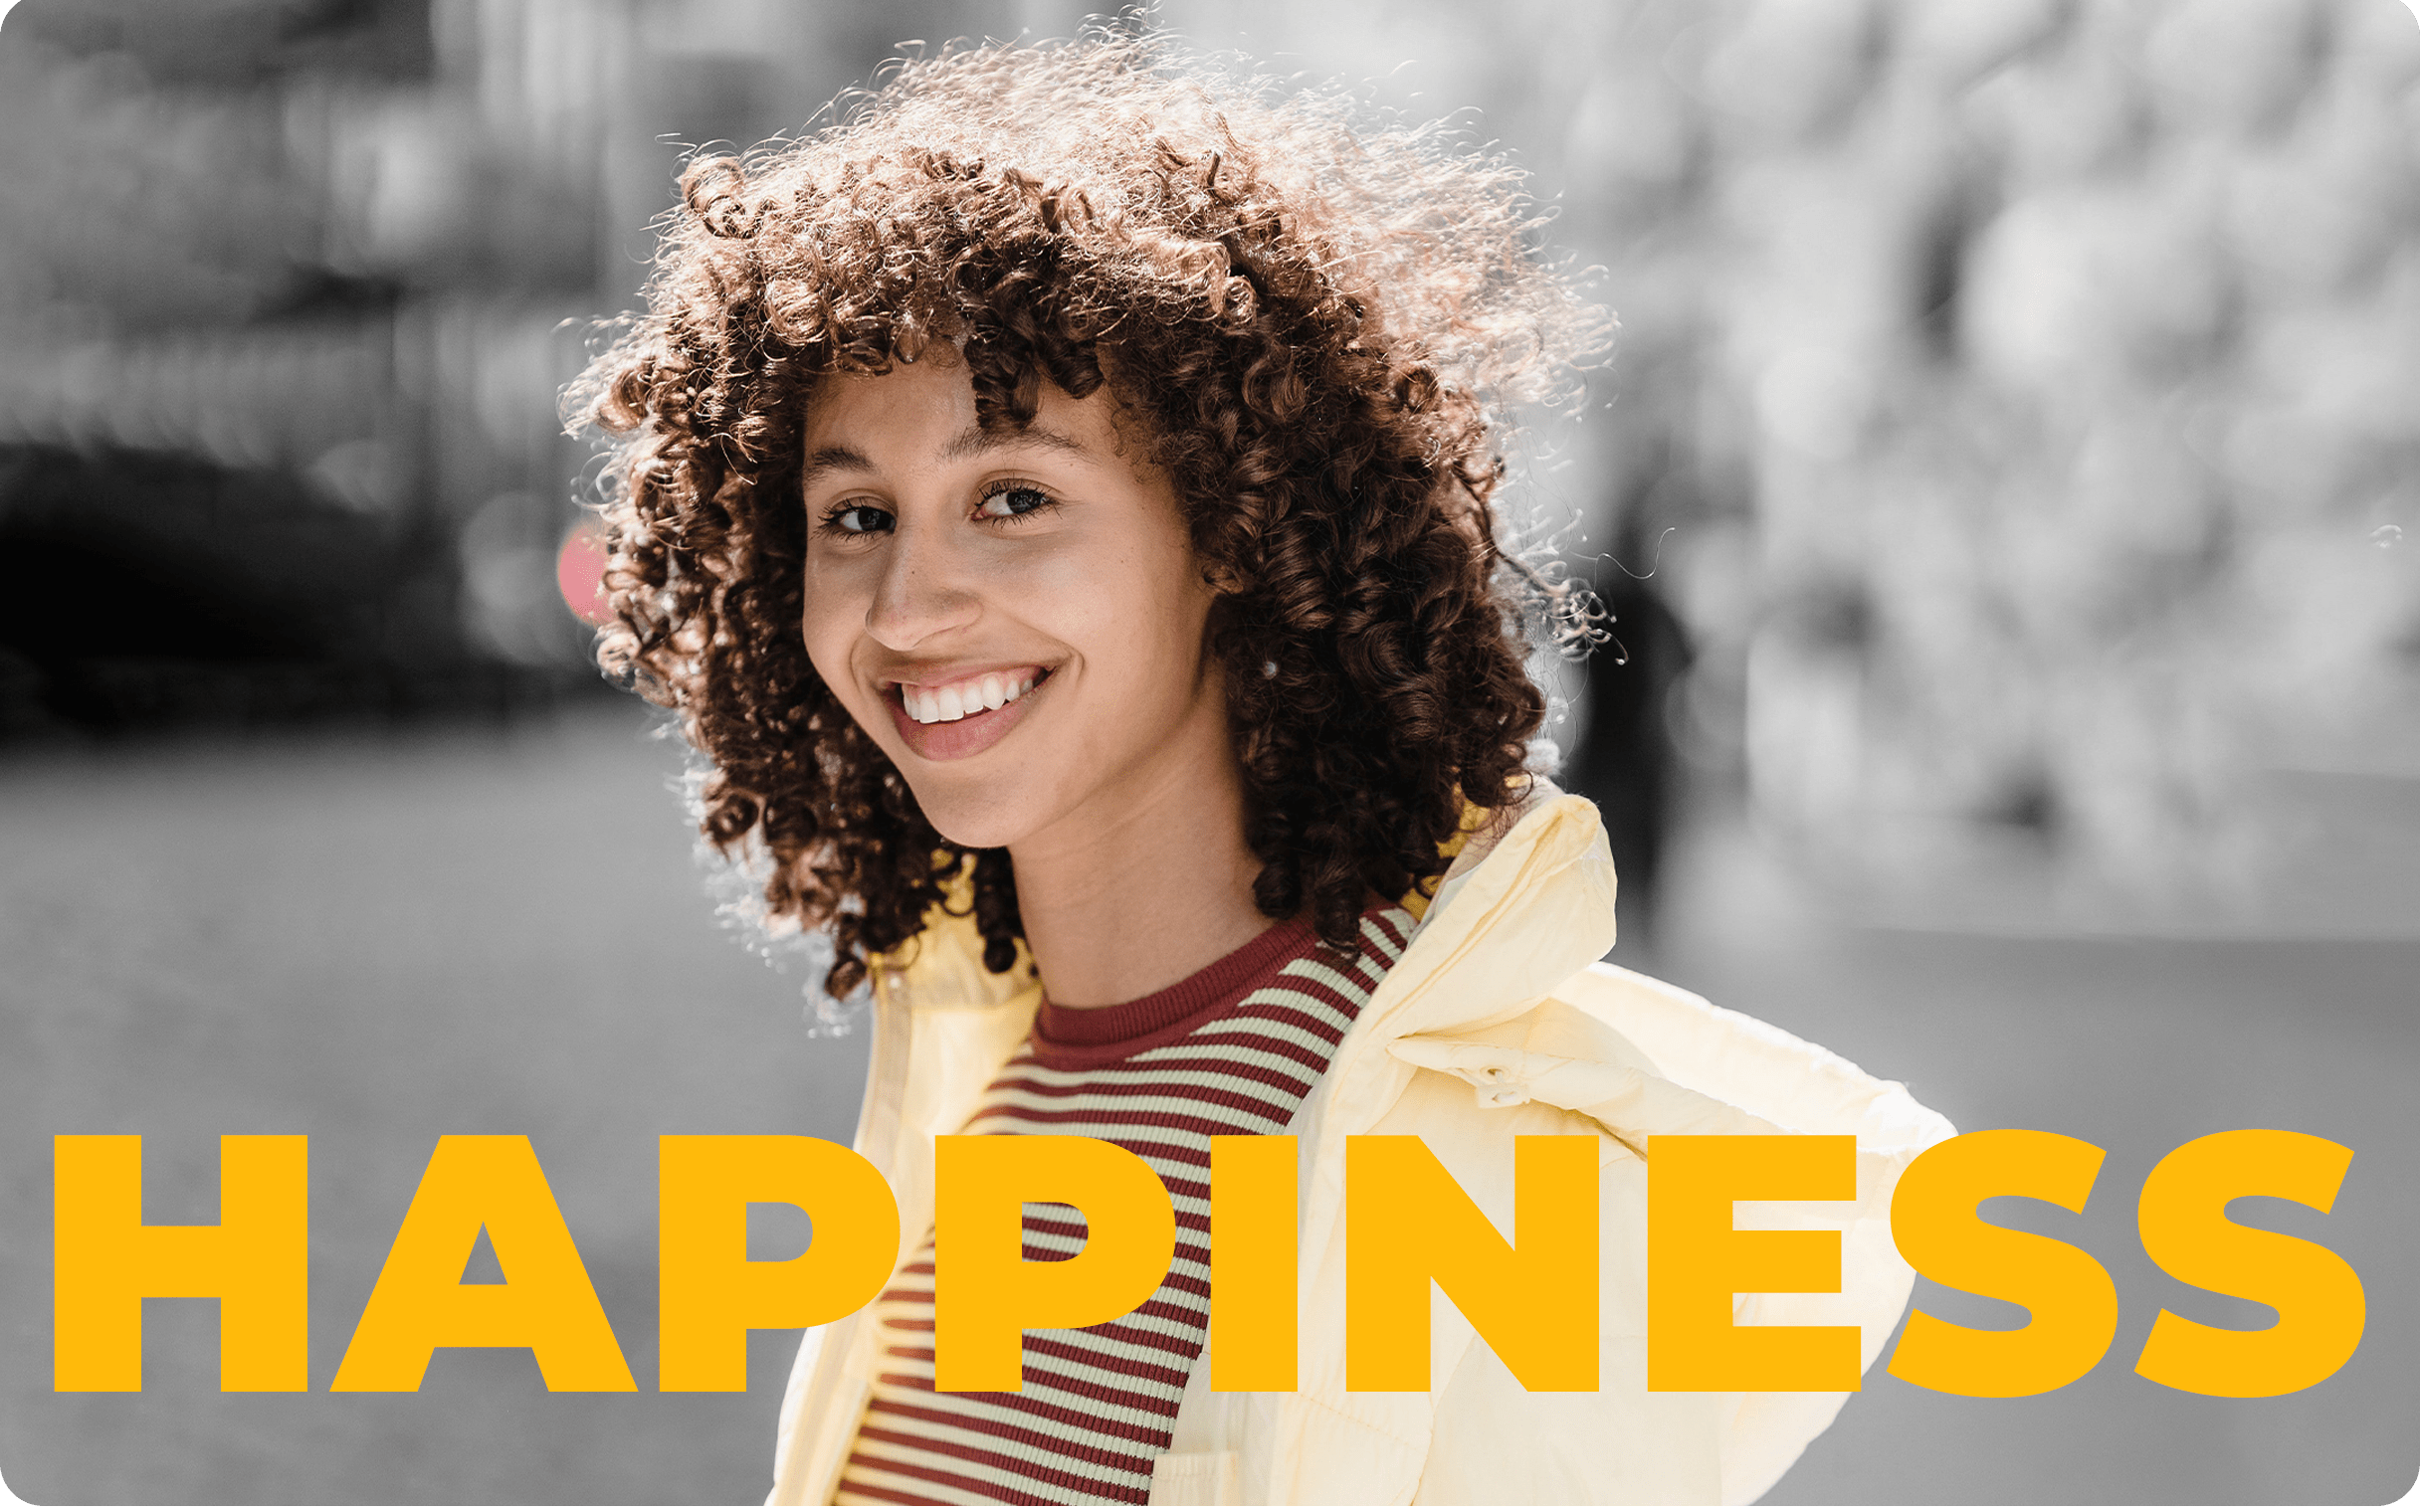 Expressing happiness: Top English words and phrases for spreading joy